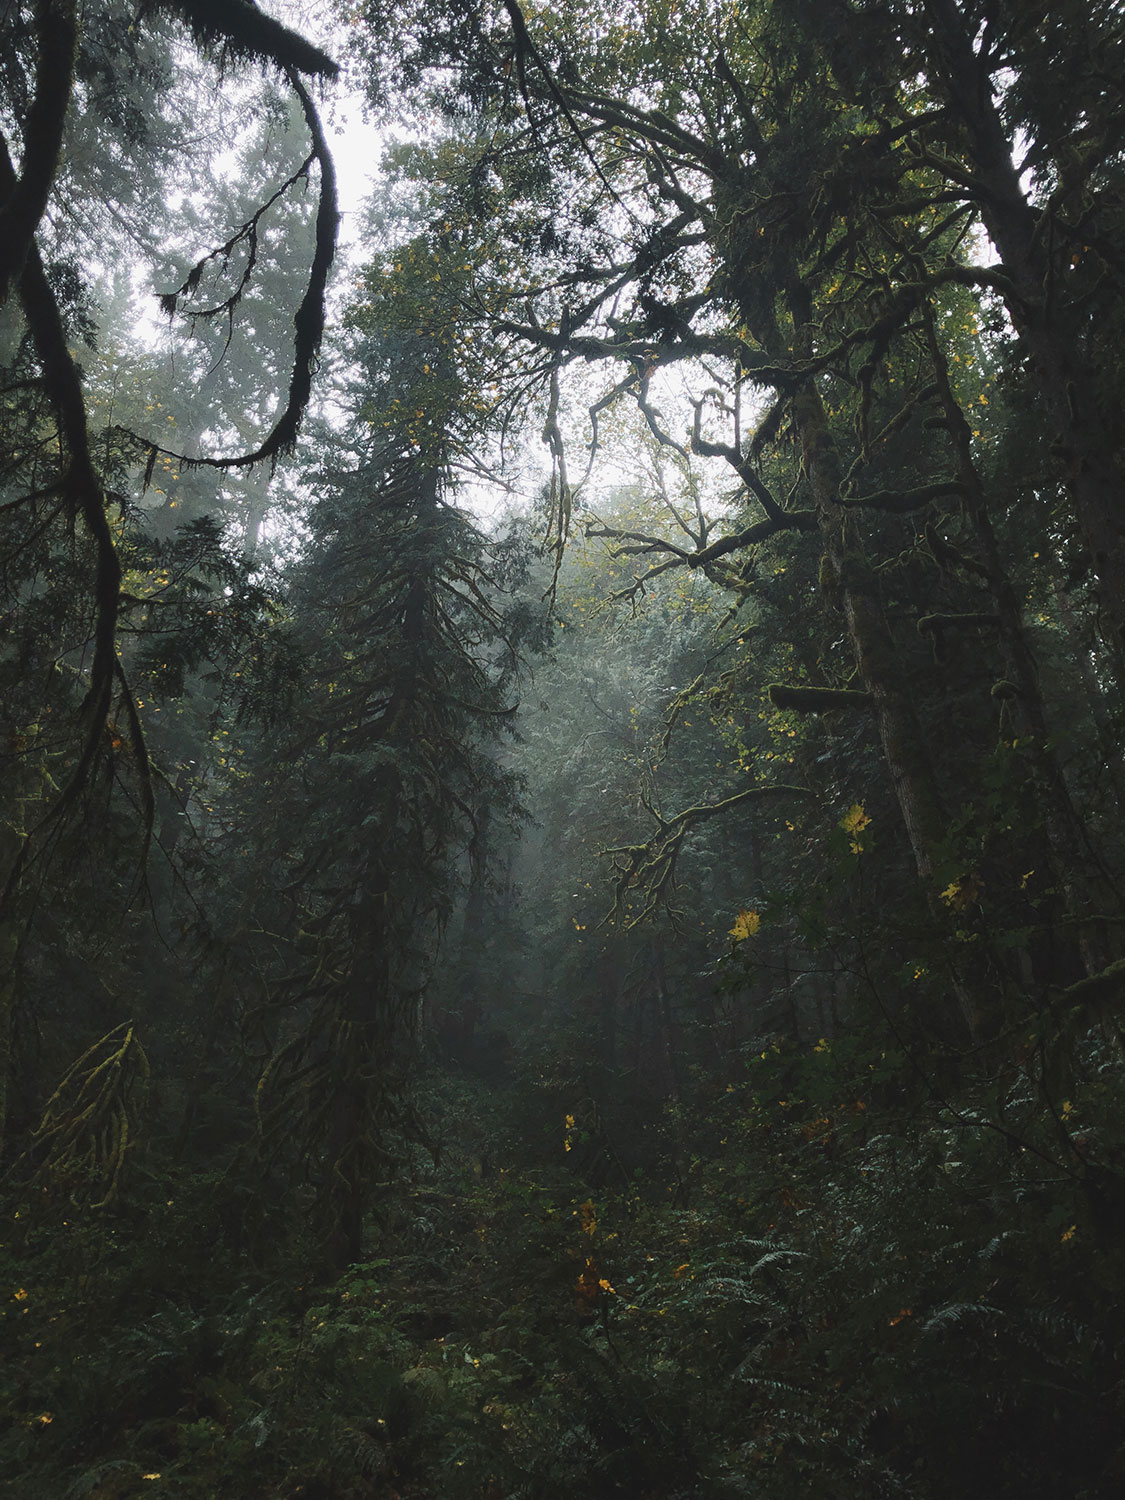 A dark and gloomy forest in the mist, with occasional glints of golden leaves against the darkness.